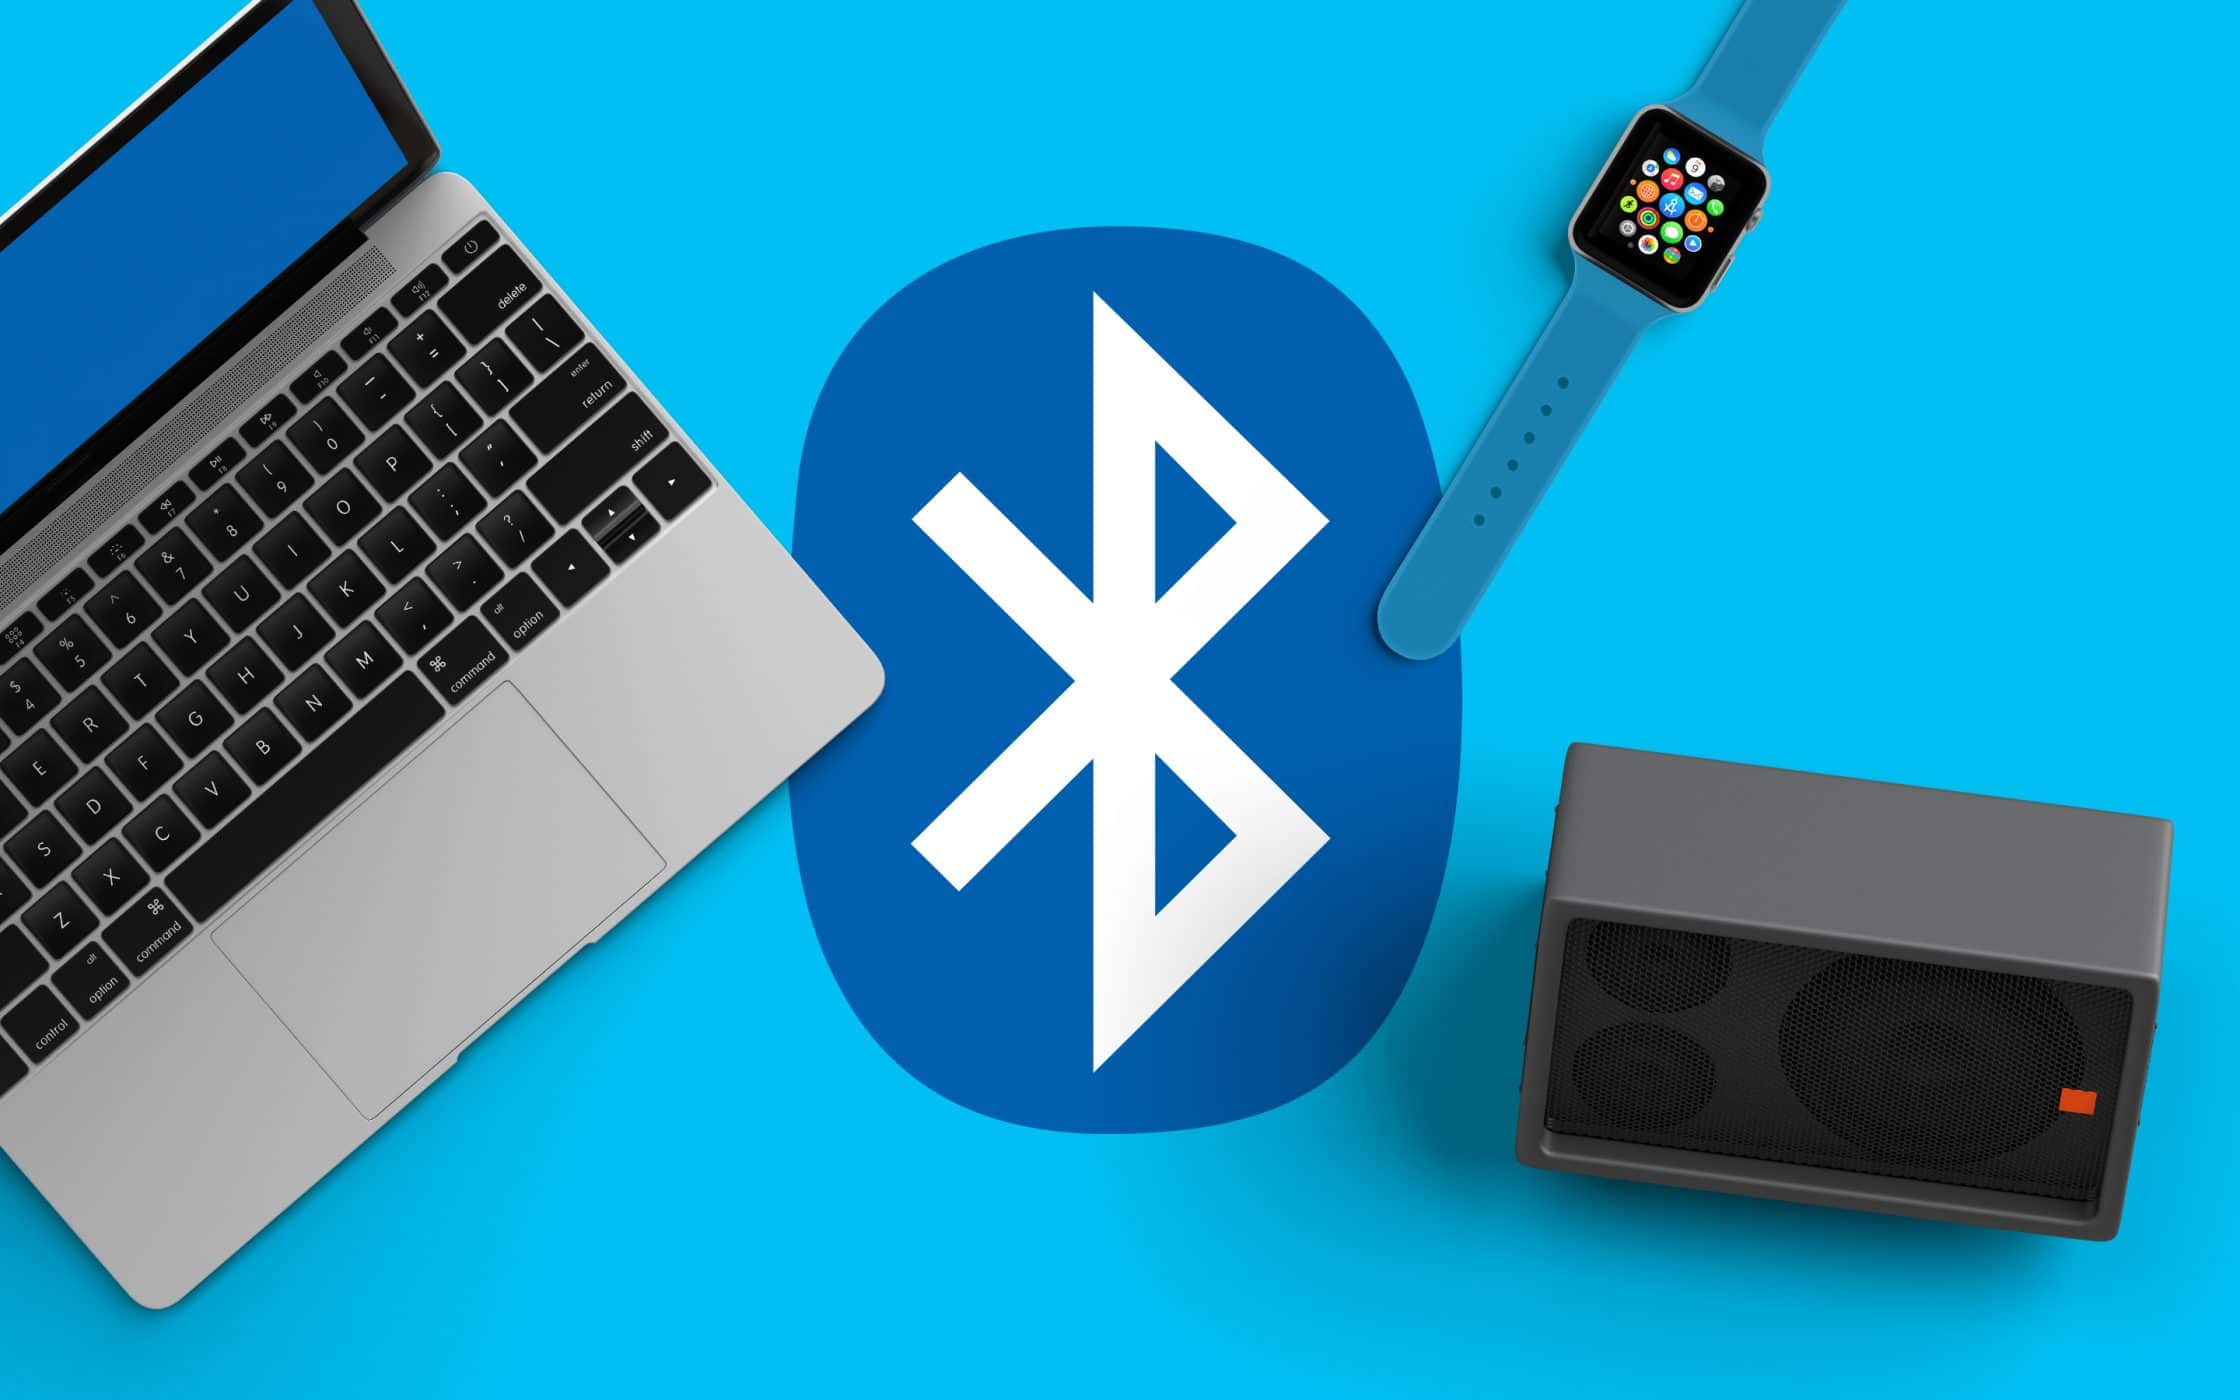 Devices that work with Bluetooth technology would be vulnerable